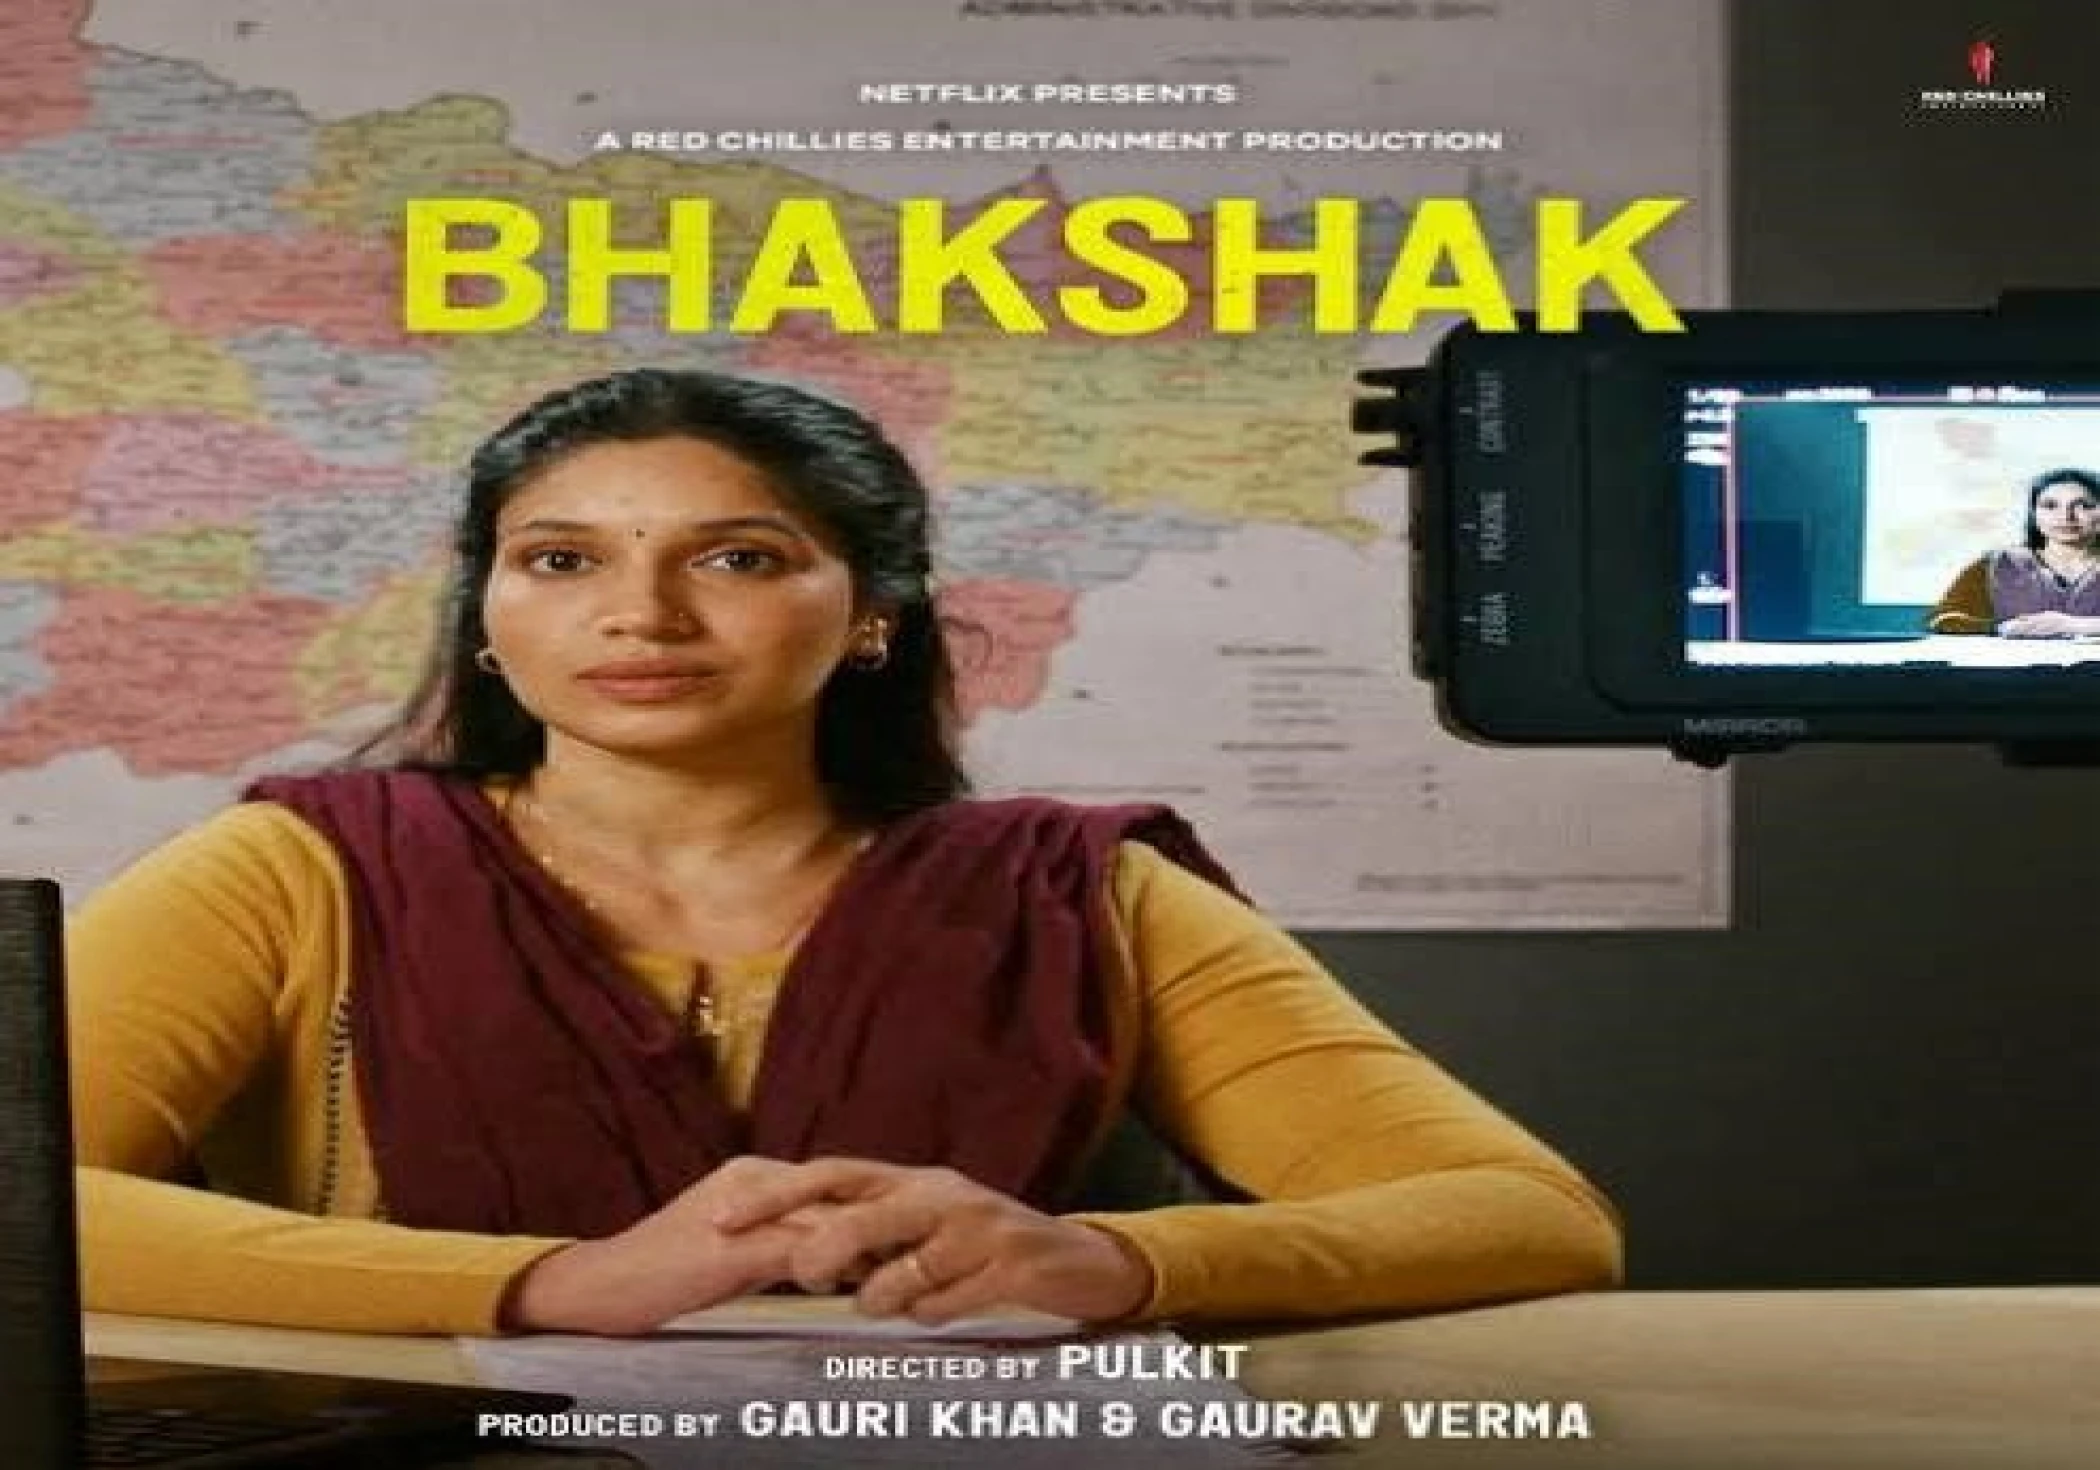 Movie Review : Bhakshak,” directed by Pulkit  is a noteworthy addition to the realm of social drama, featuring the talented Bhumi Pednekar in a compelling role.